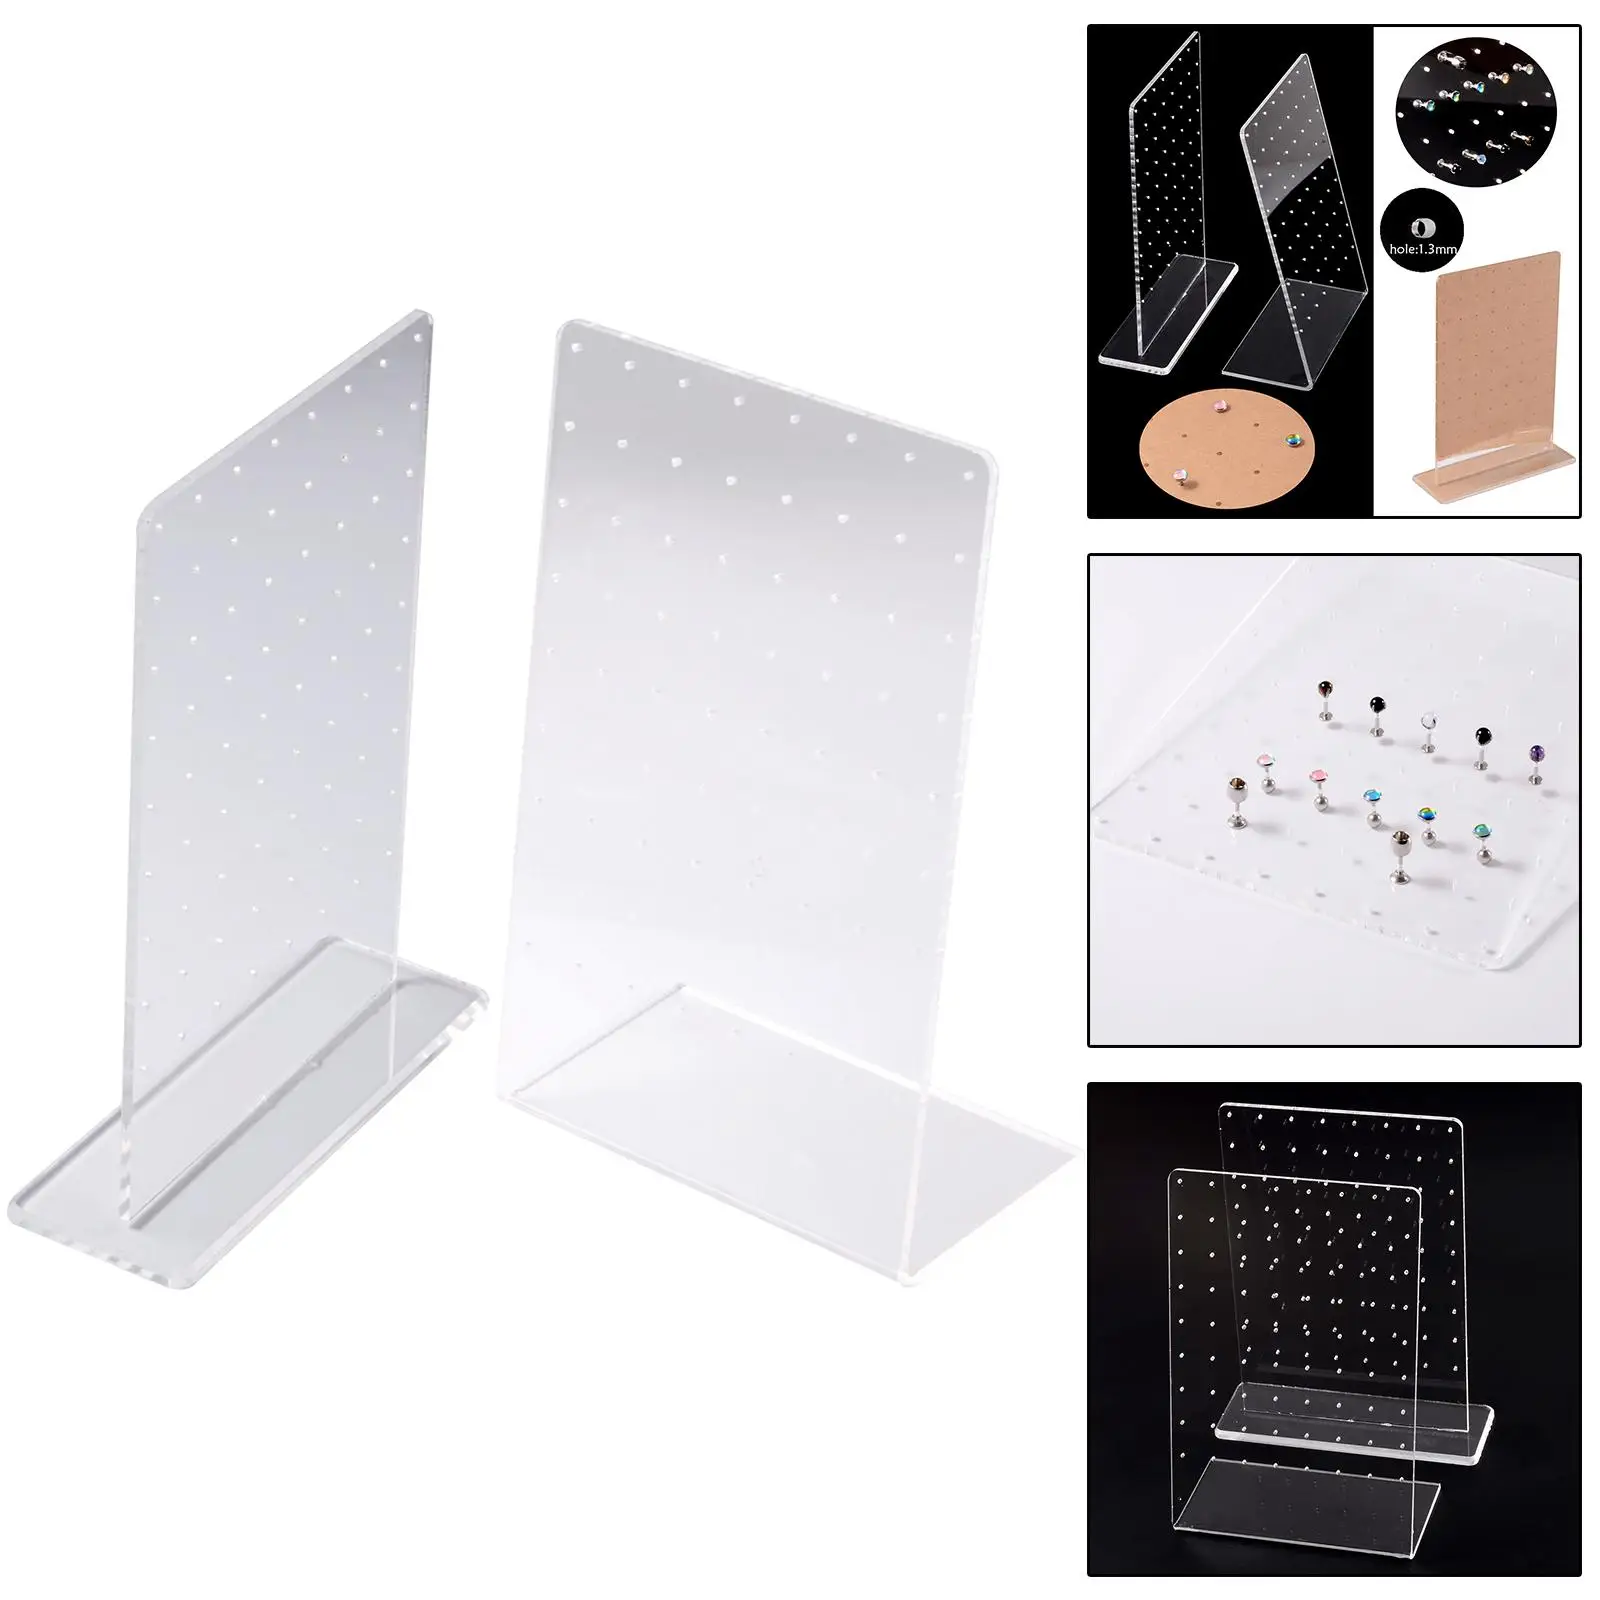 Acrylic Earrings Display Stand Necklace Ear Studs Jewelry Pendant Gift Clear Board Case Rack for Photography Retail Storage Shop